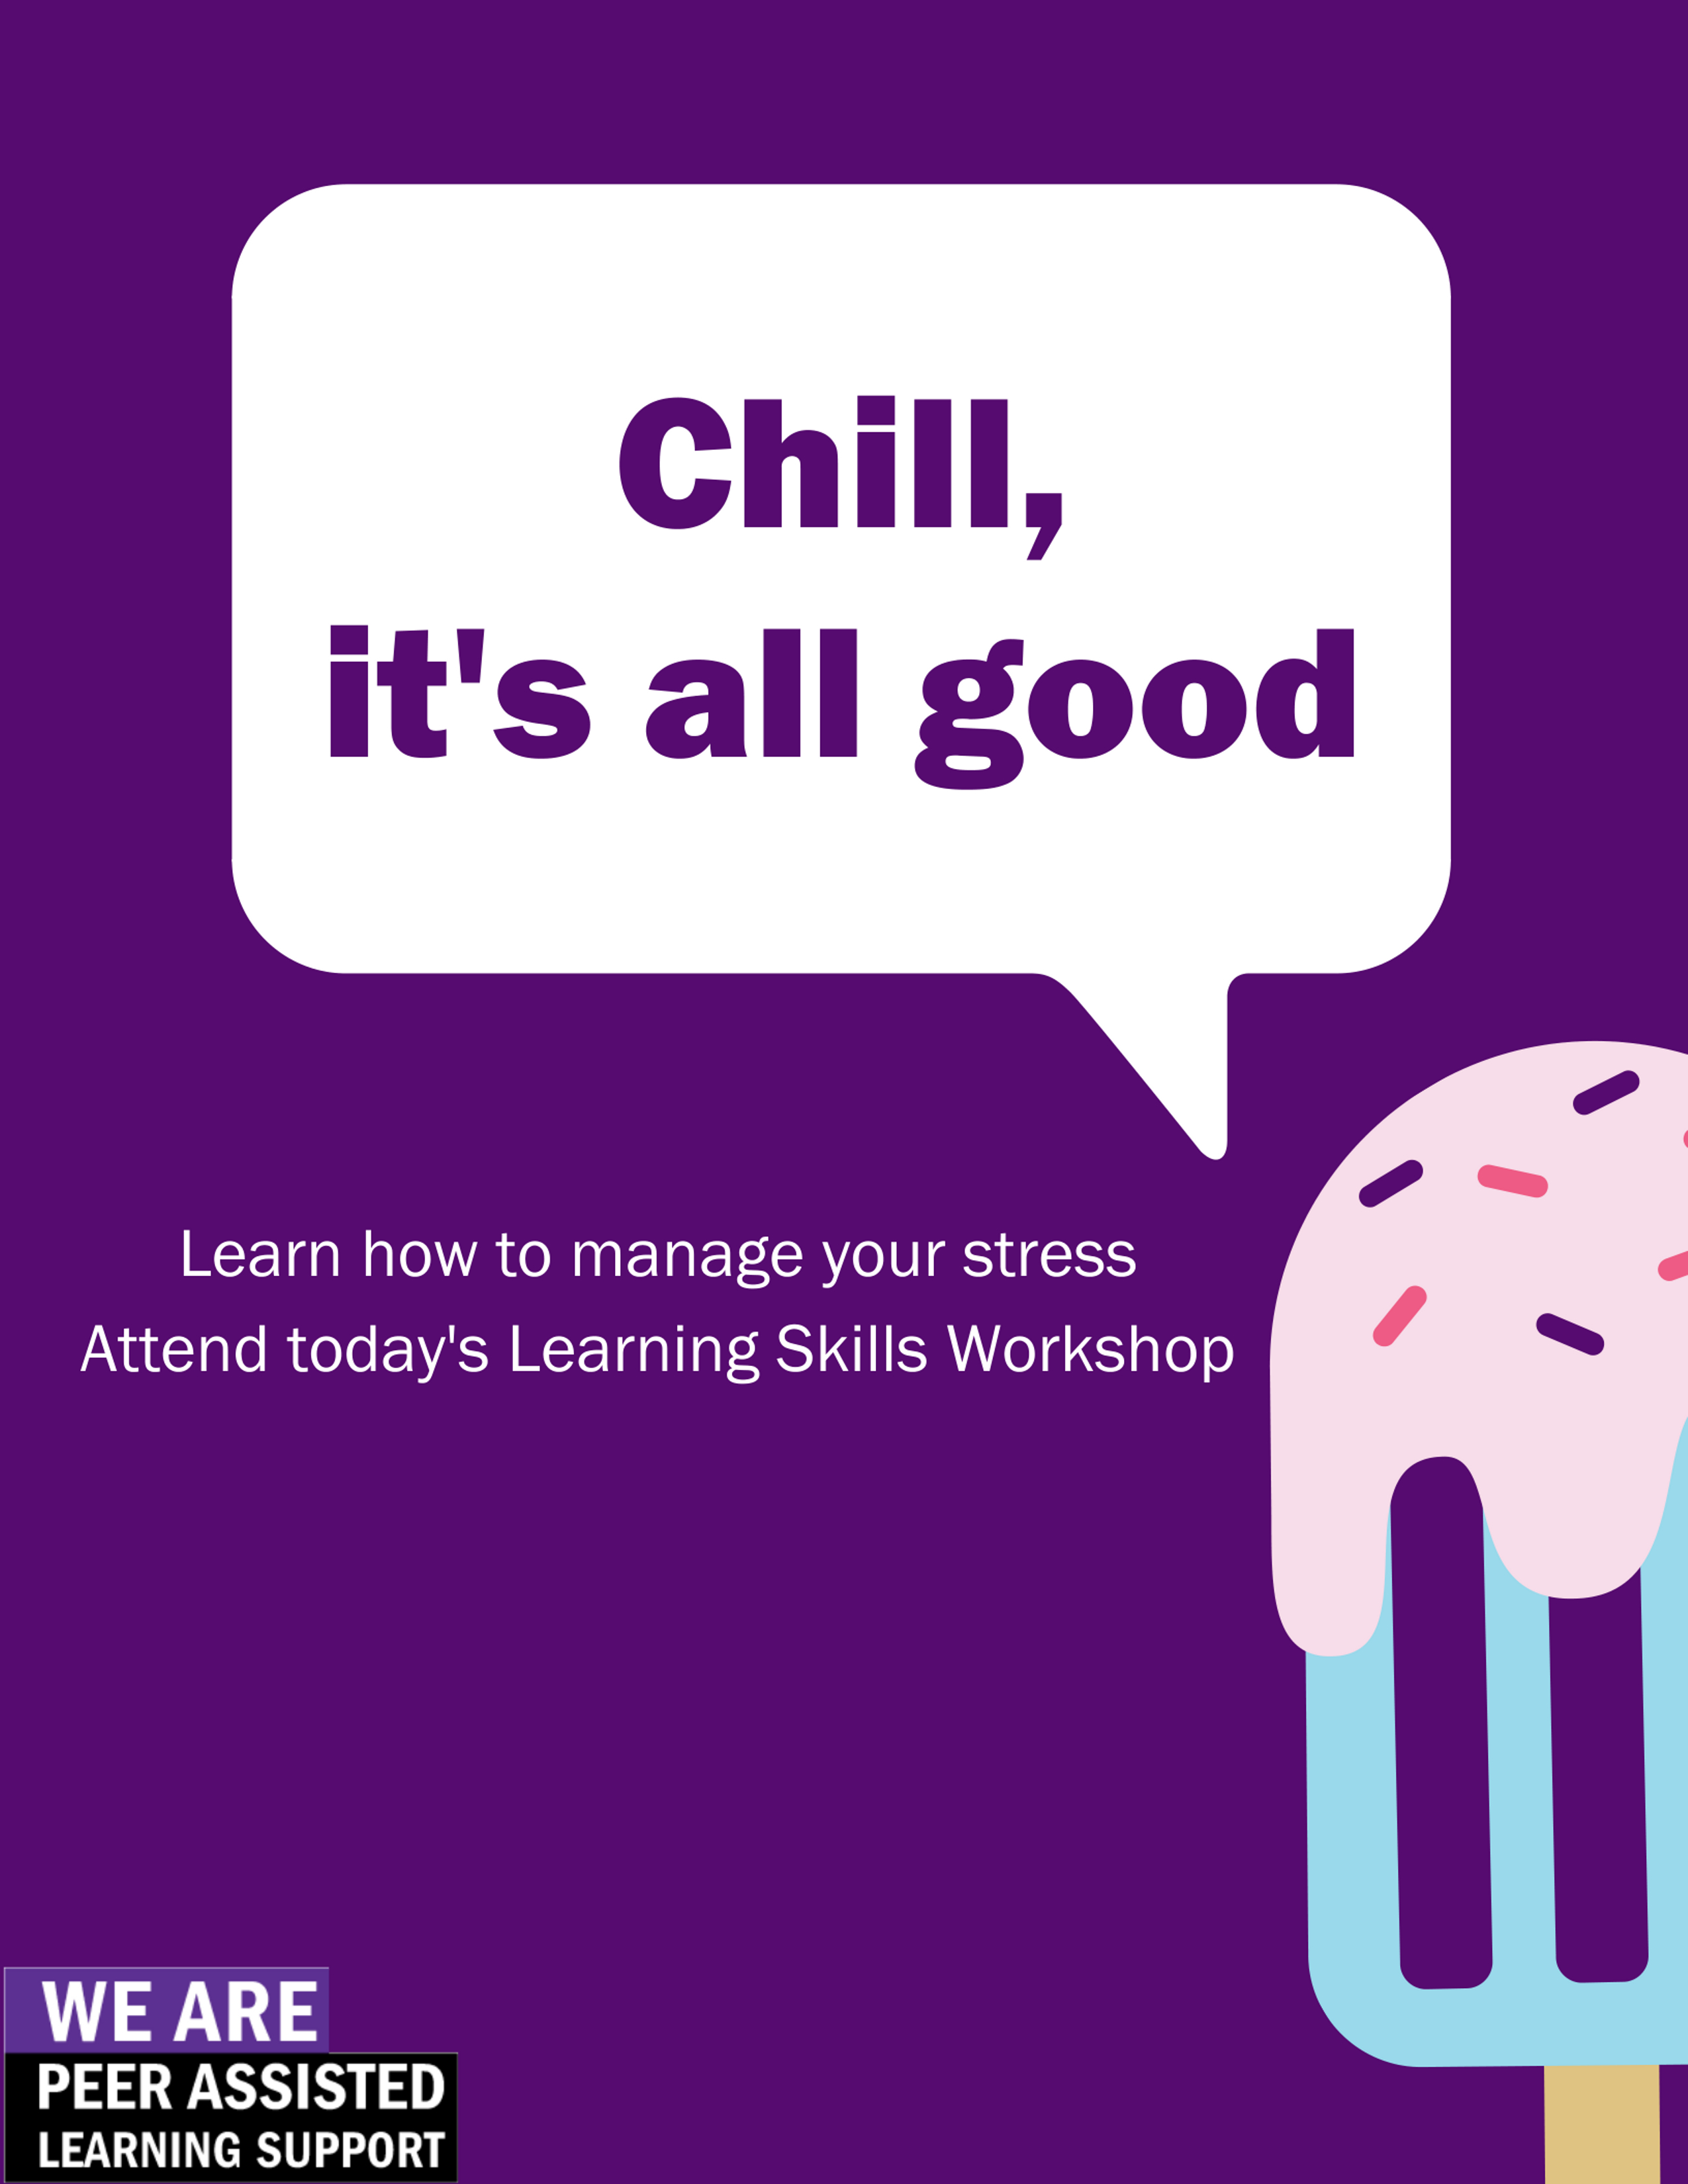  An image of a popsicle on a bright purple background. Background text says “Chill, it’s all good. Learn how to manage your stre